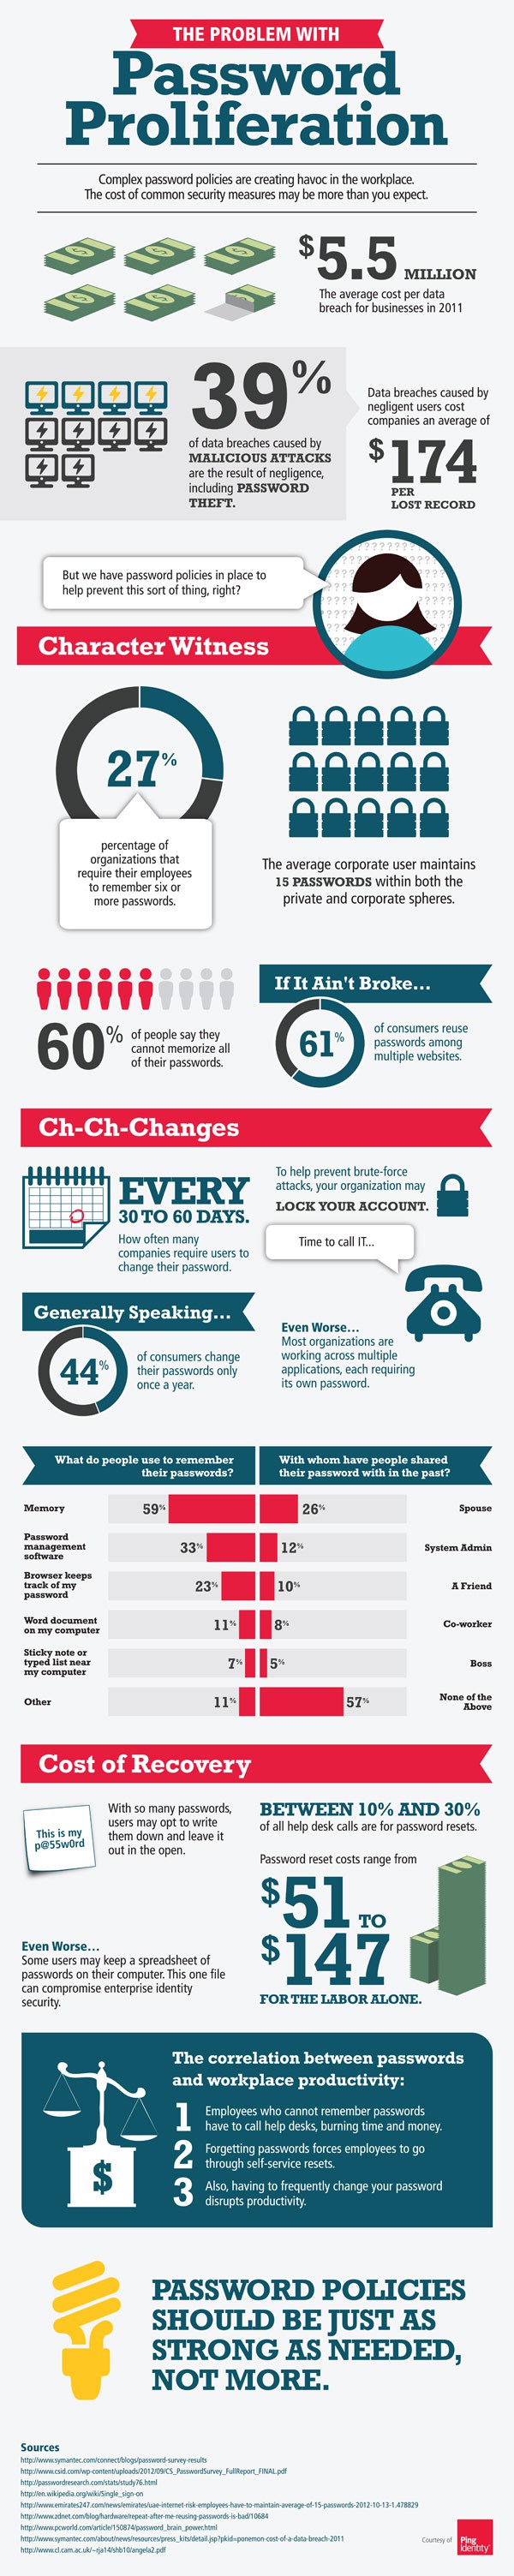 The Problem With Passwords [Infographic]